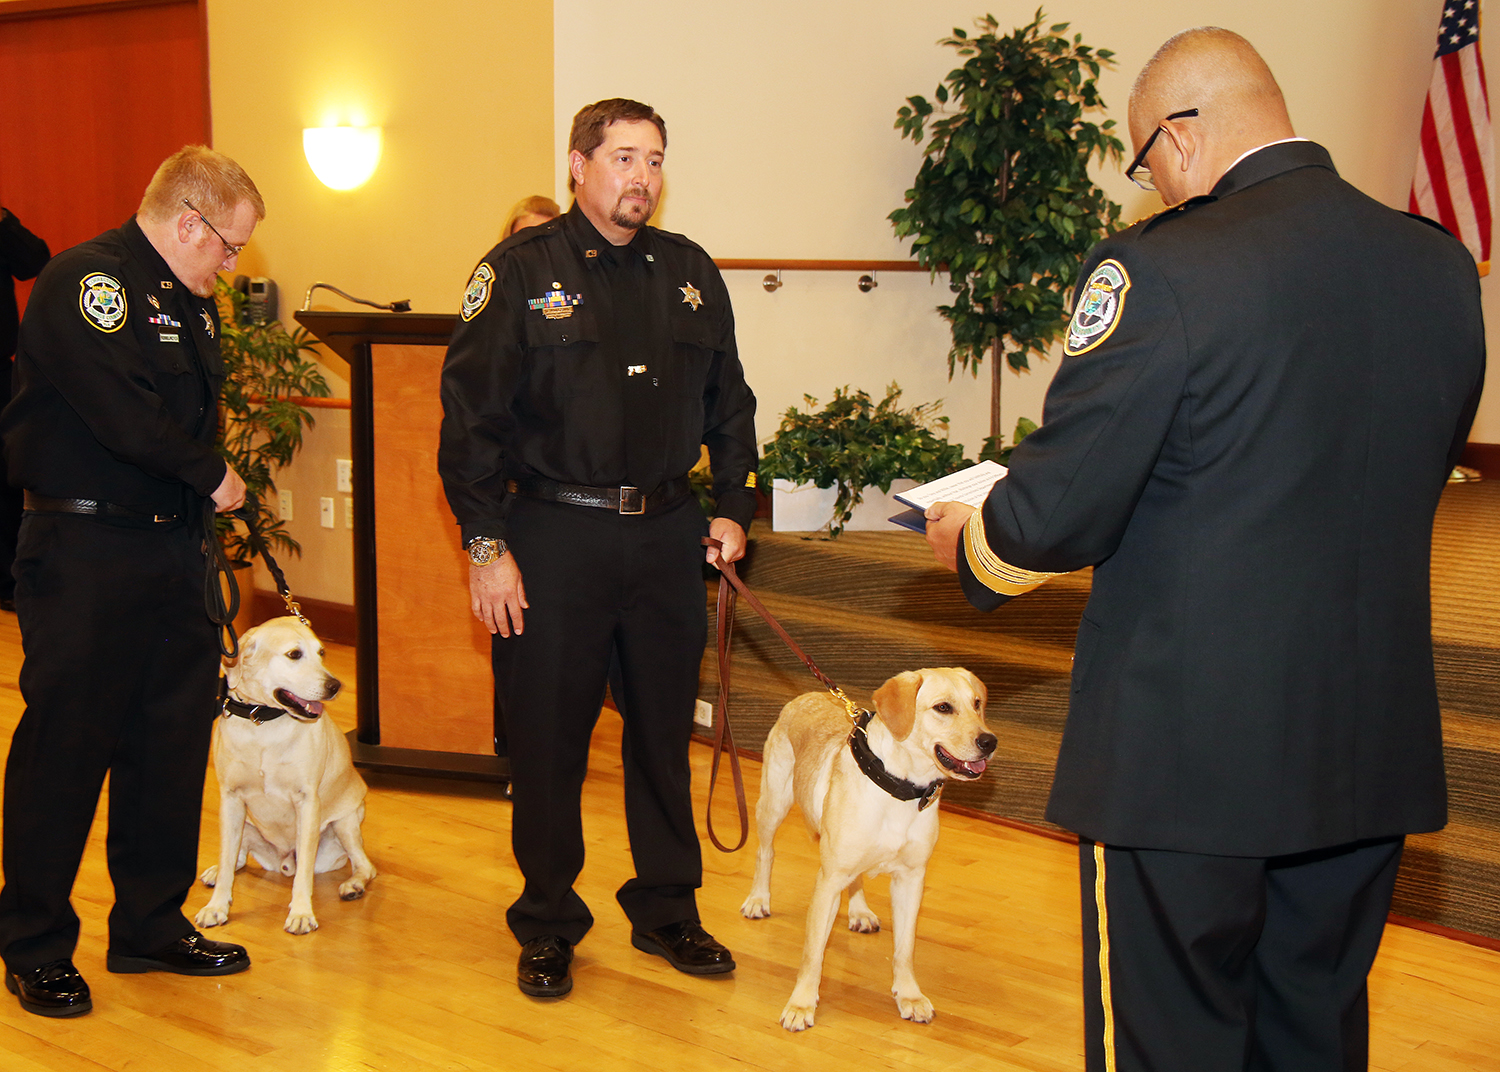 Two officers holding two K-9 dogs on a leash as they are sworn in